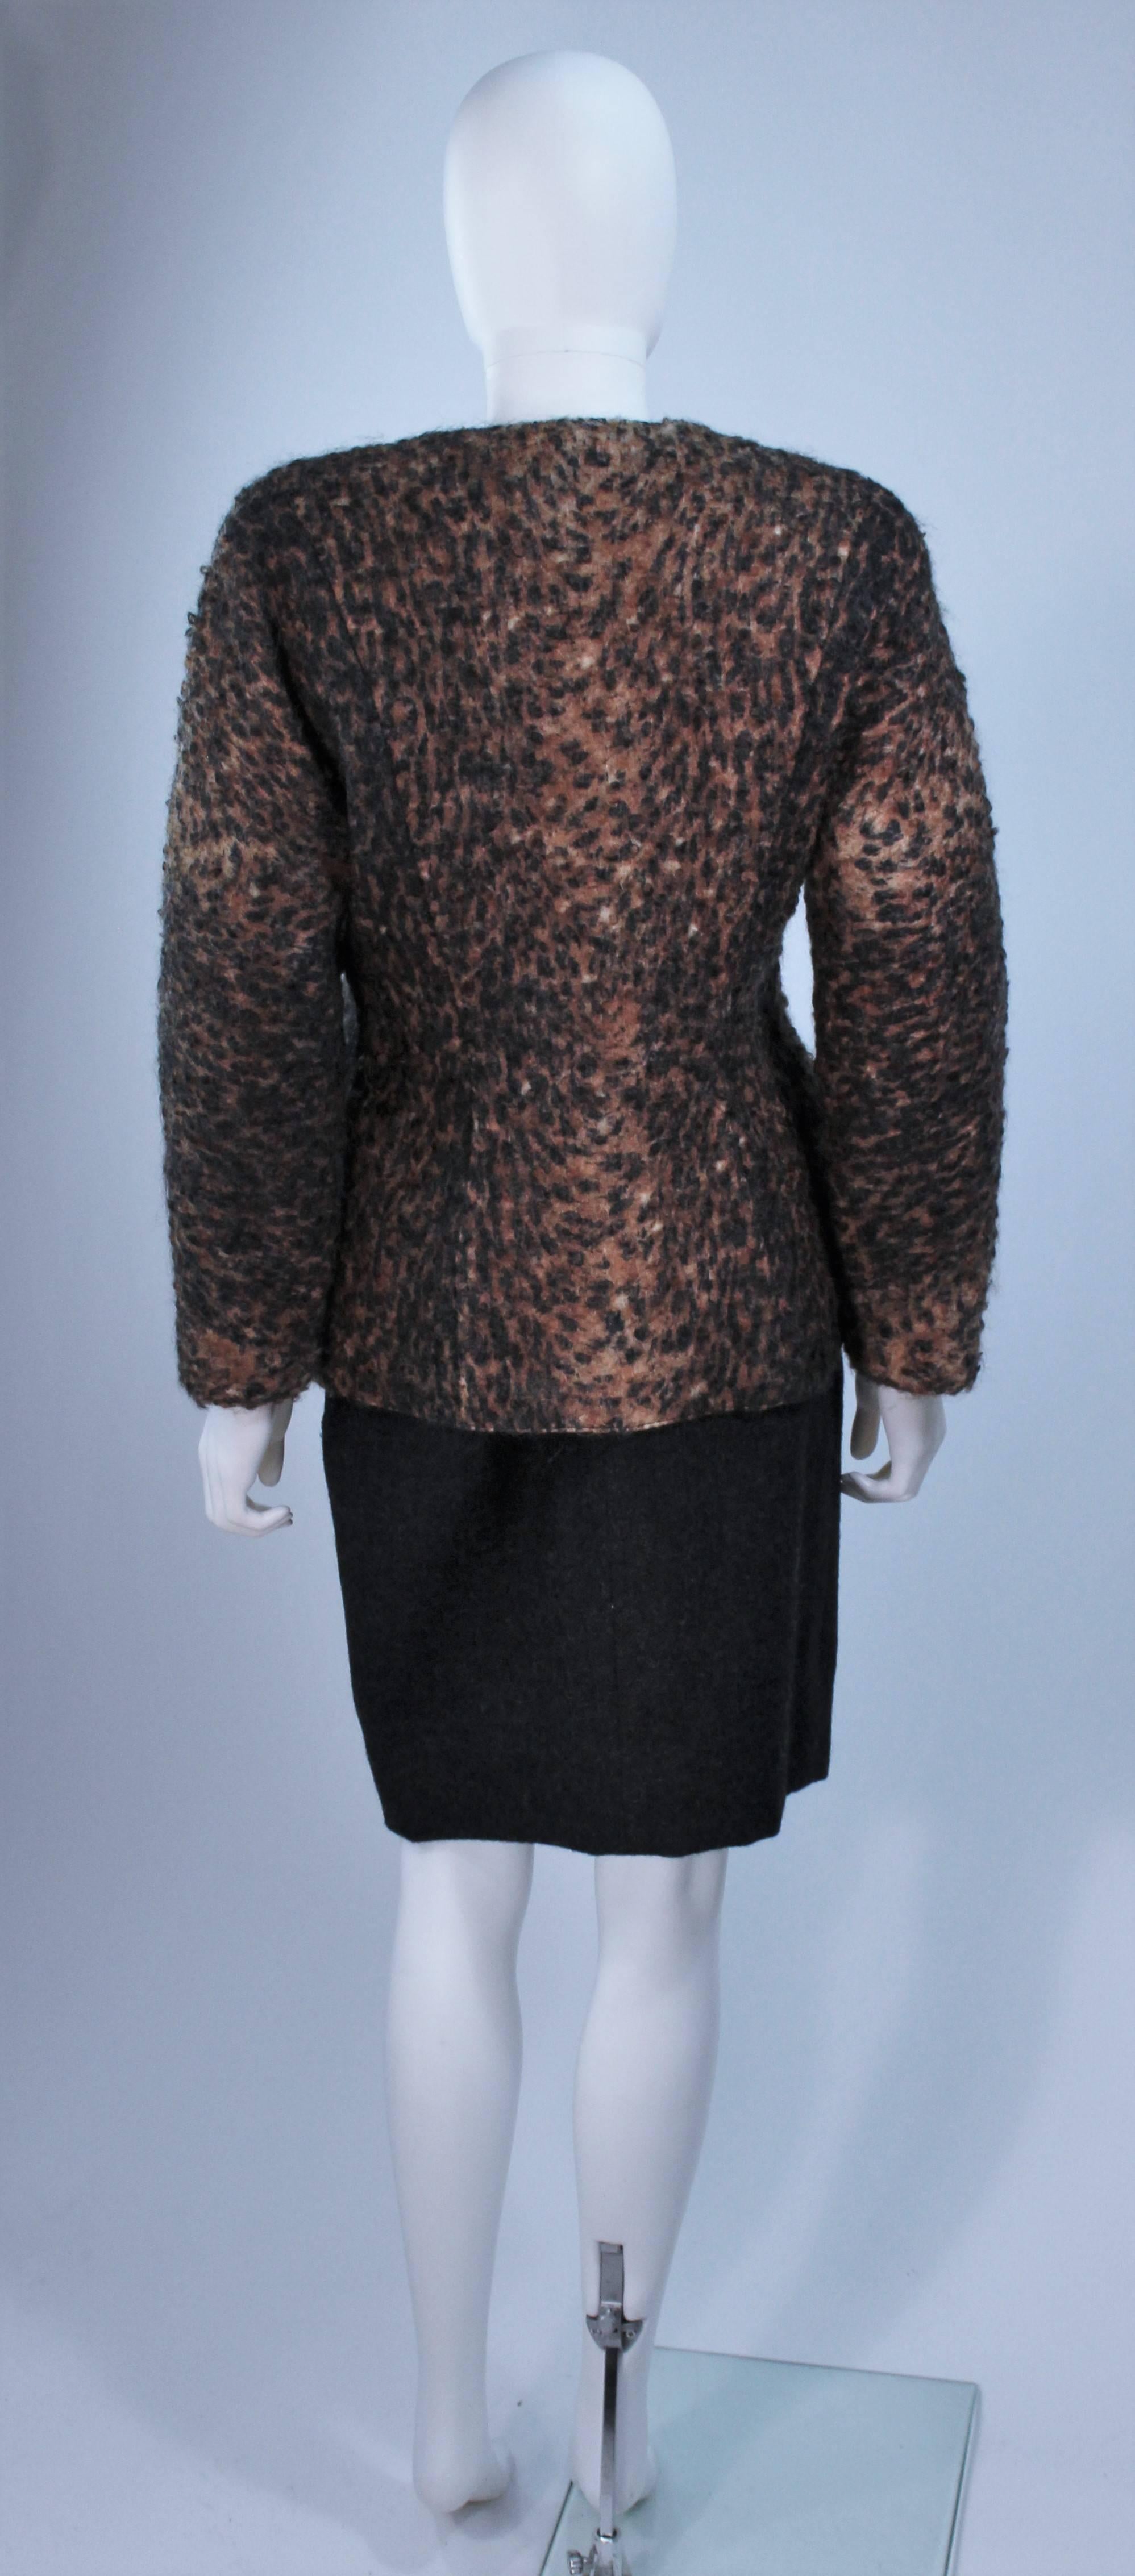 Black GEOFFREY BEENE Skirt Suit Ensemble with Printed Mohair Jacket Size 4-6